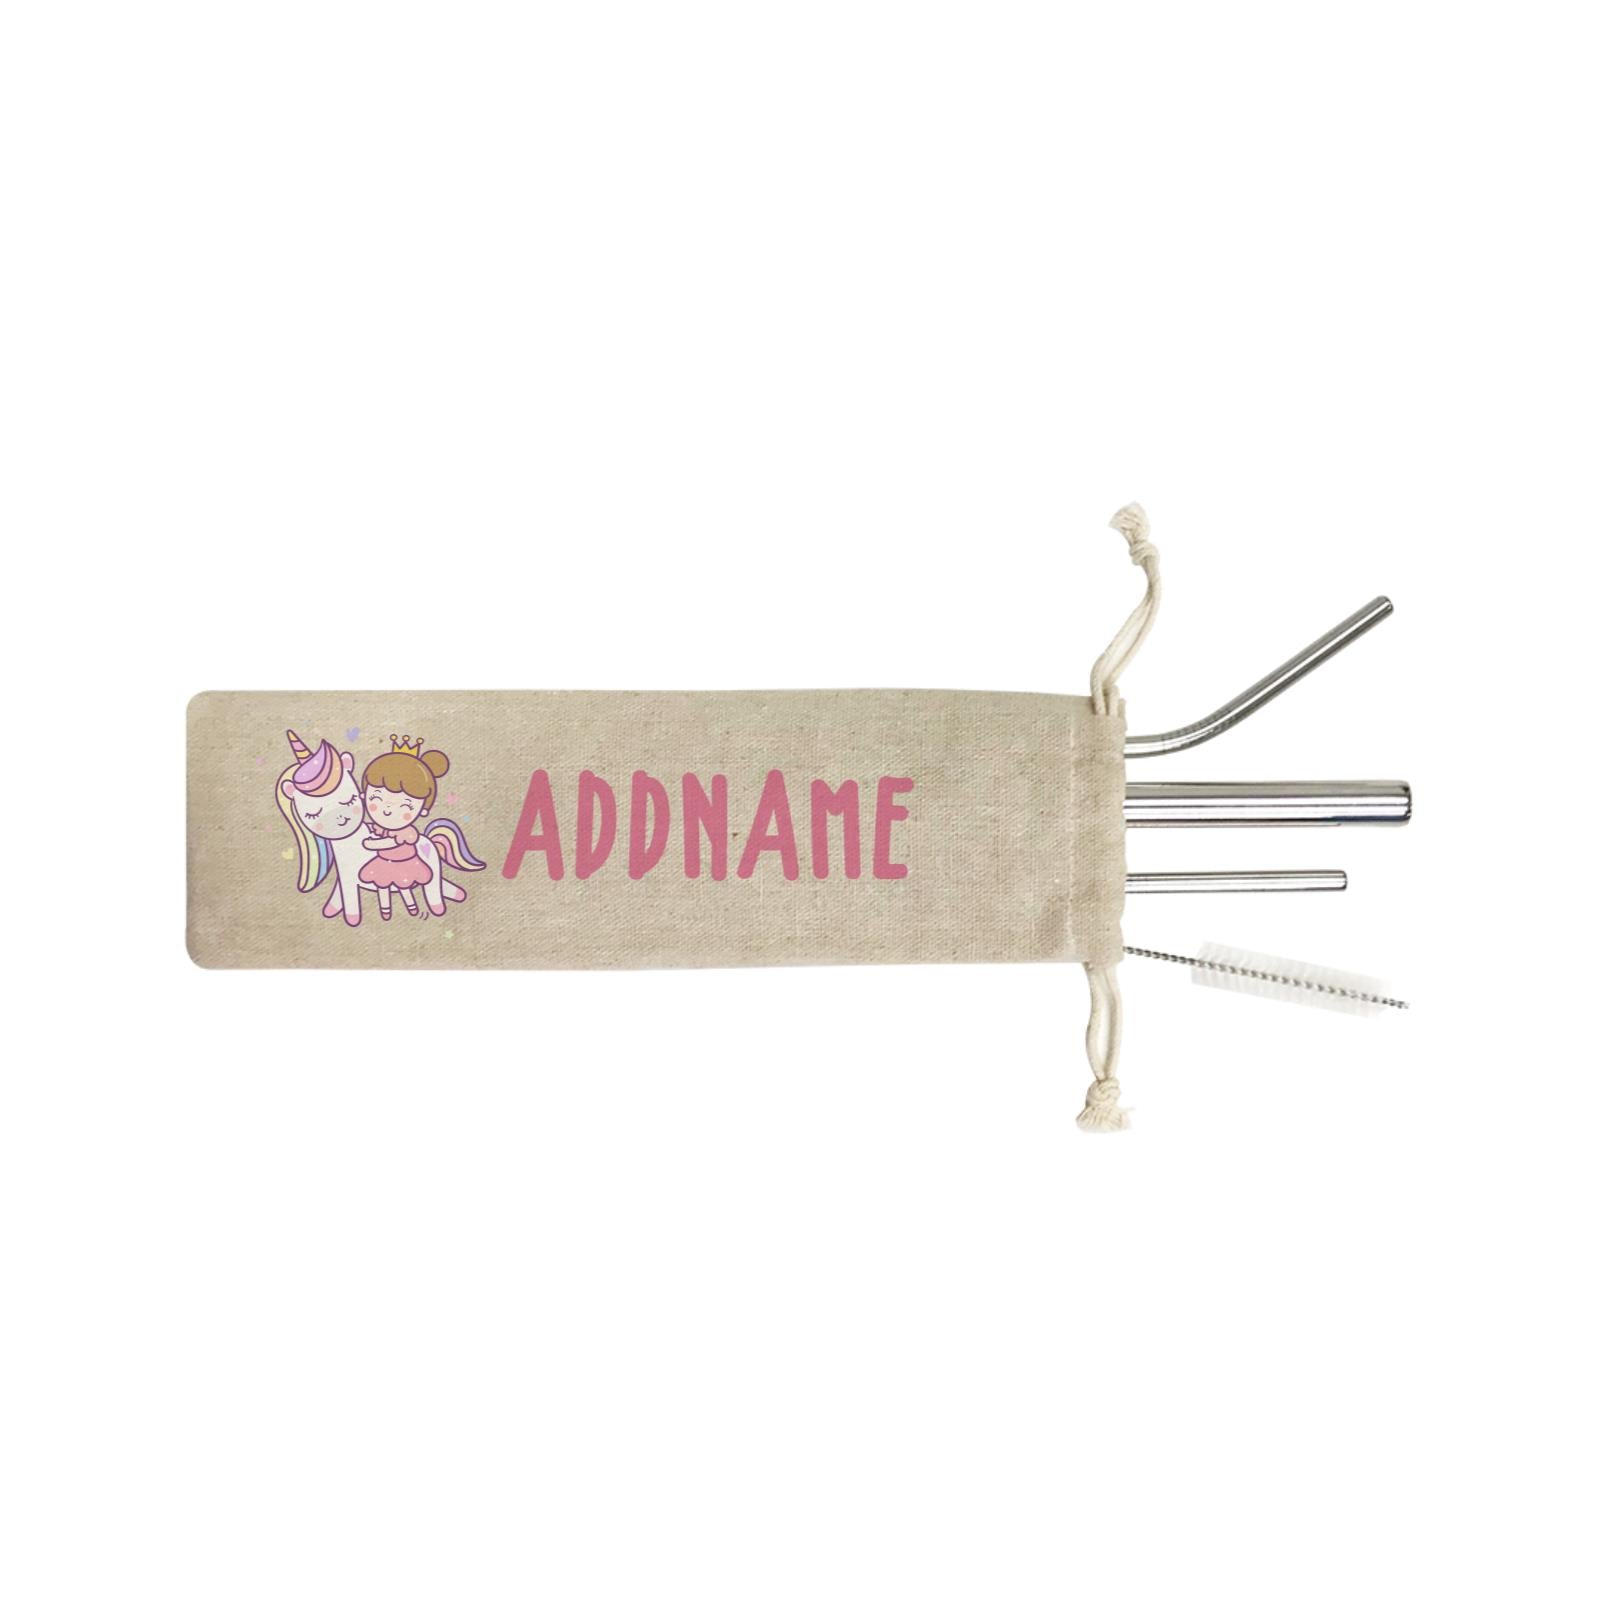 Unicorn And Princess Series Cute Unicorn With Princess Addname SB 4-In-1 Stainless Steel Straw Set in Satchel